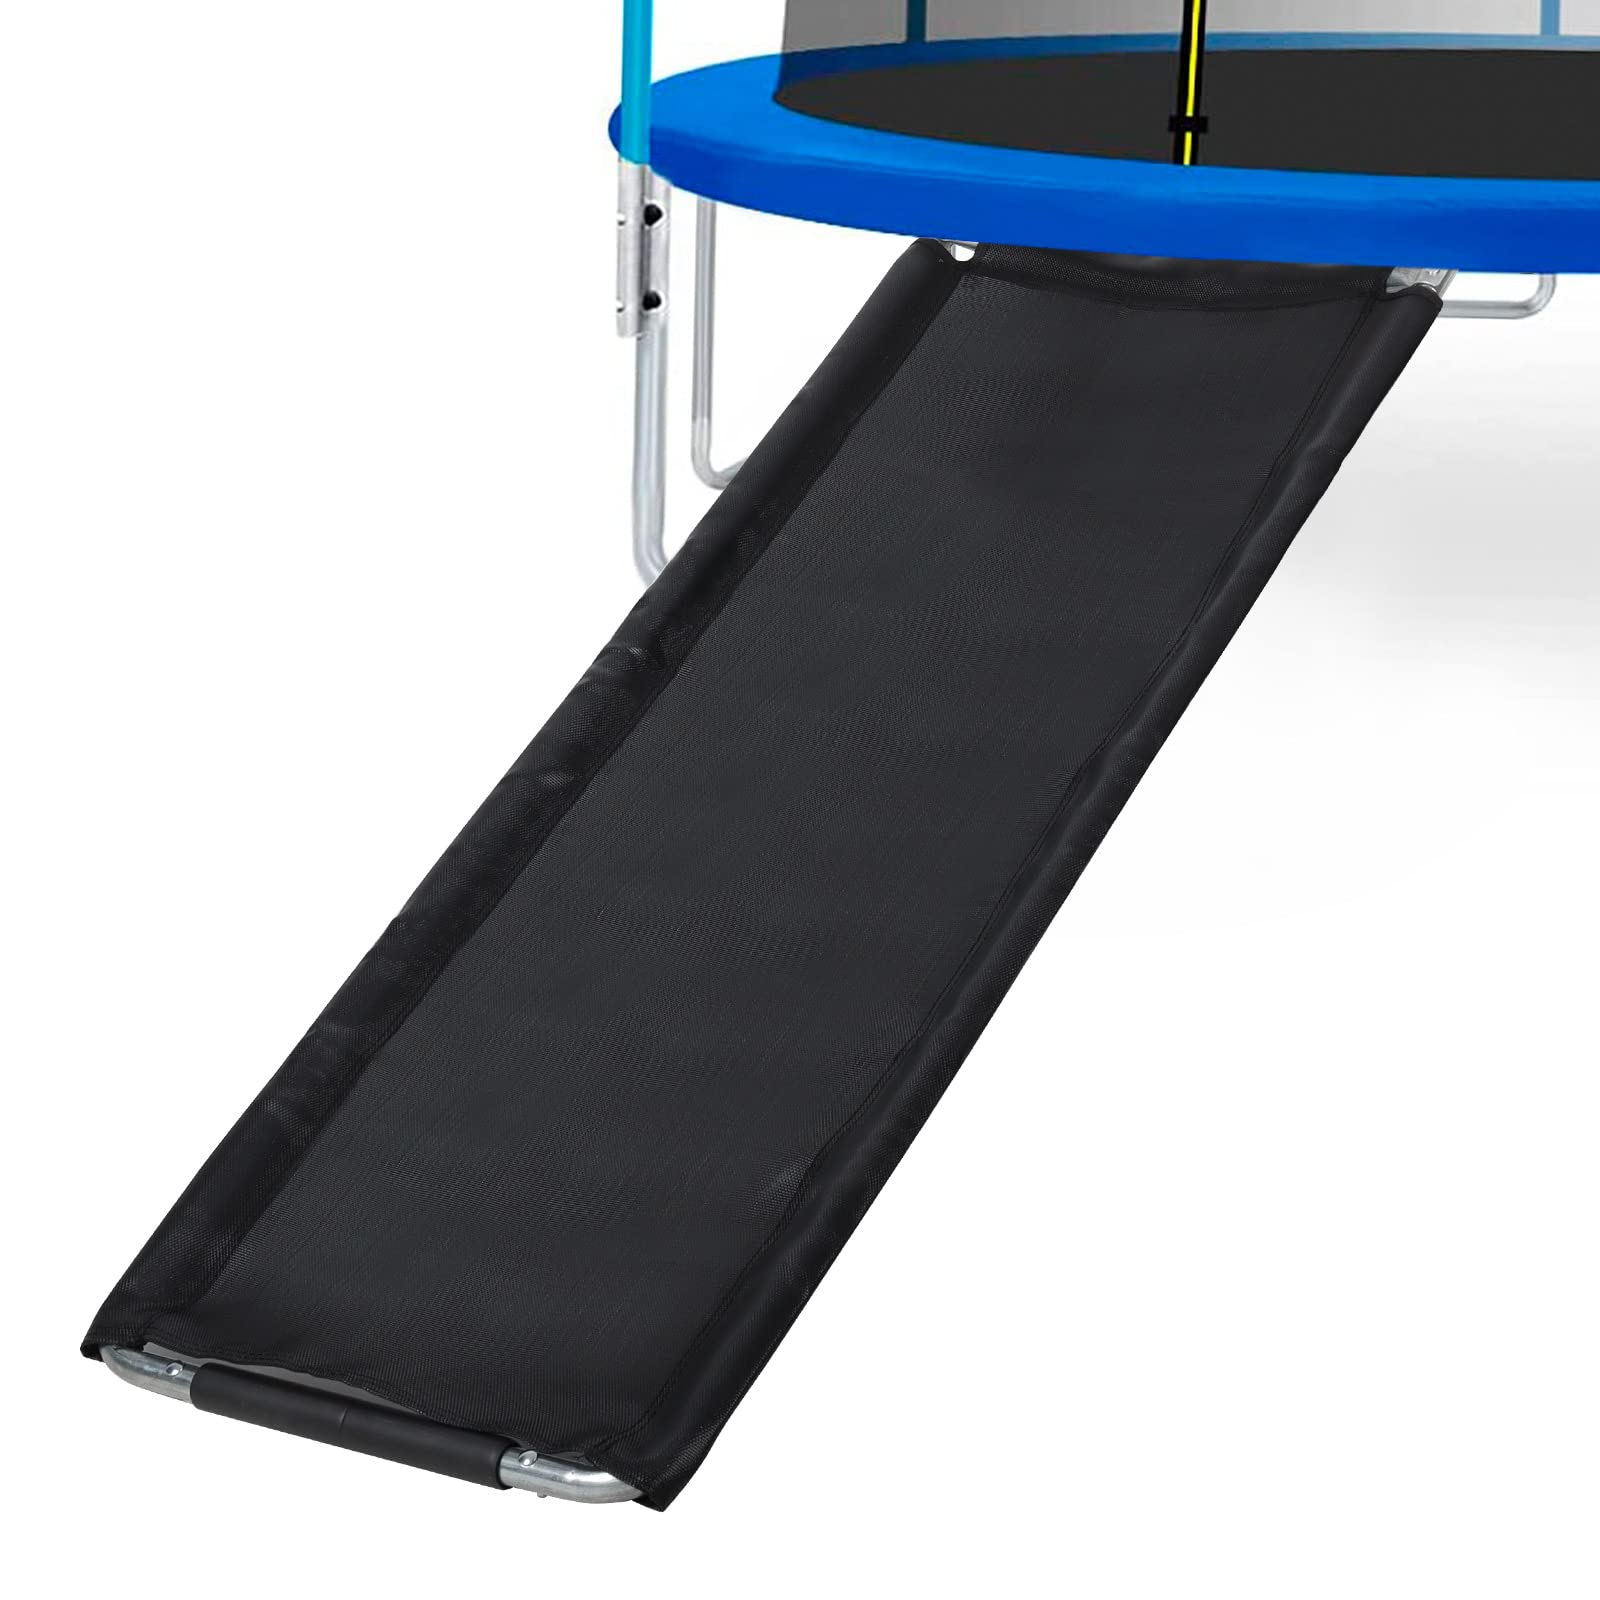 FirstE Trampoline Slide, Width 22" Slide Ladder with Strong Tear Resistant Fabric, Easy to Install Universal Trampoline Accessor